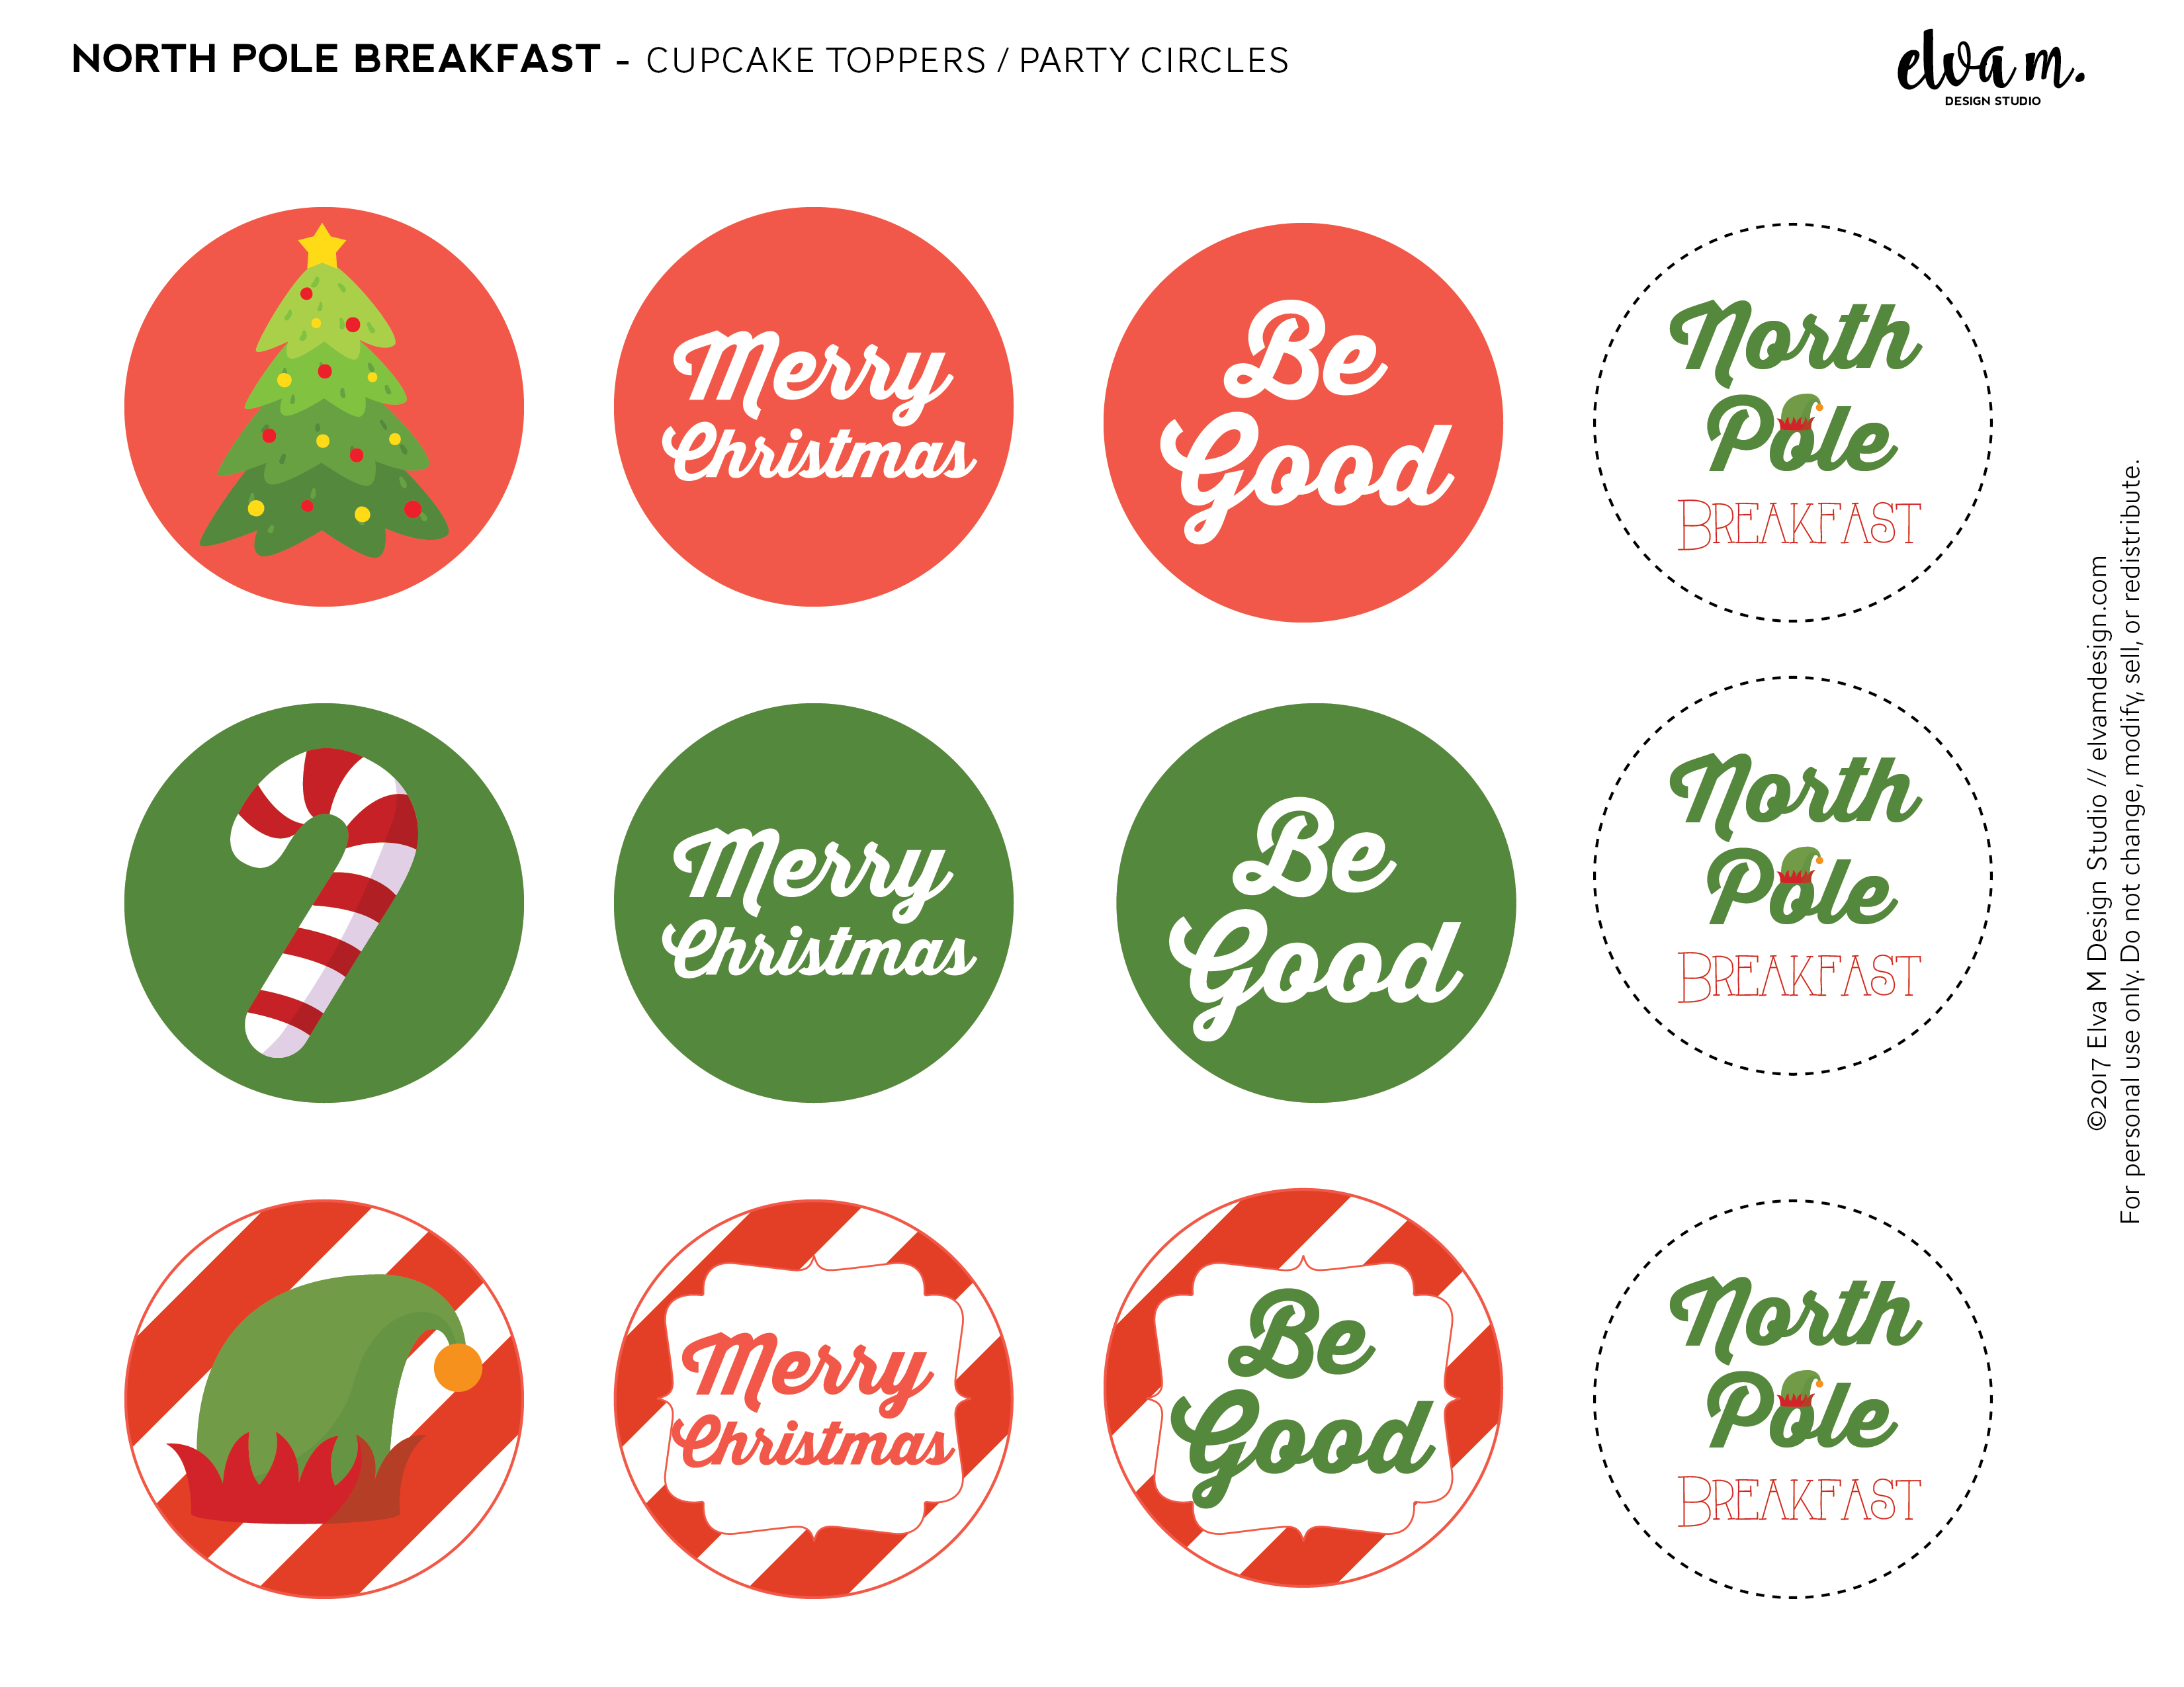 Download These Free Elf on the Shelf North Pole Breakfast Printables